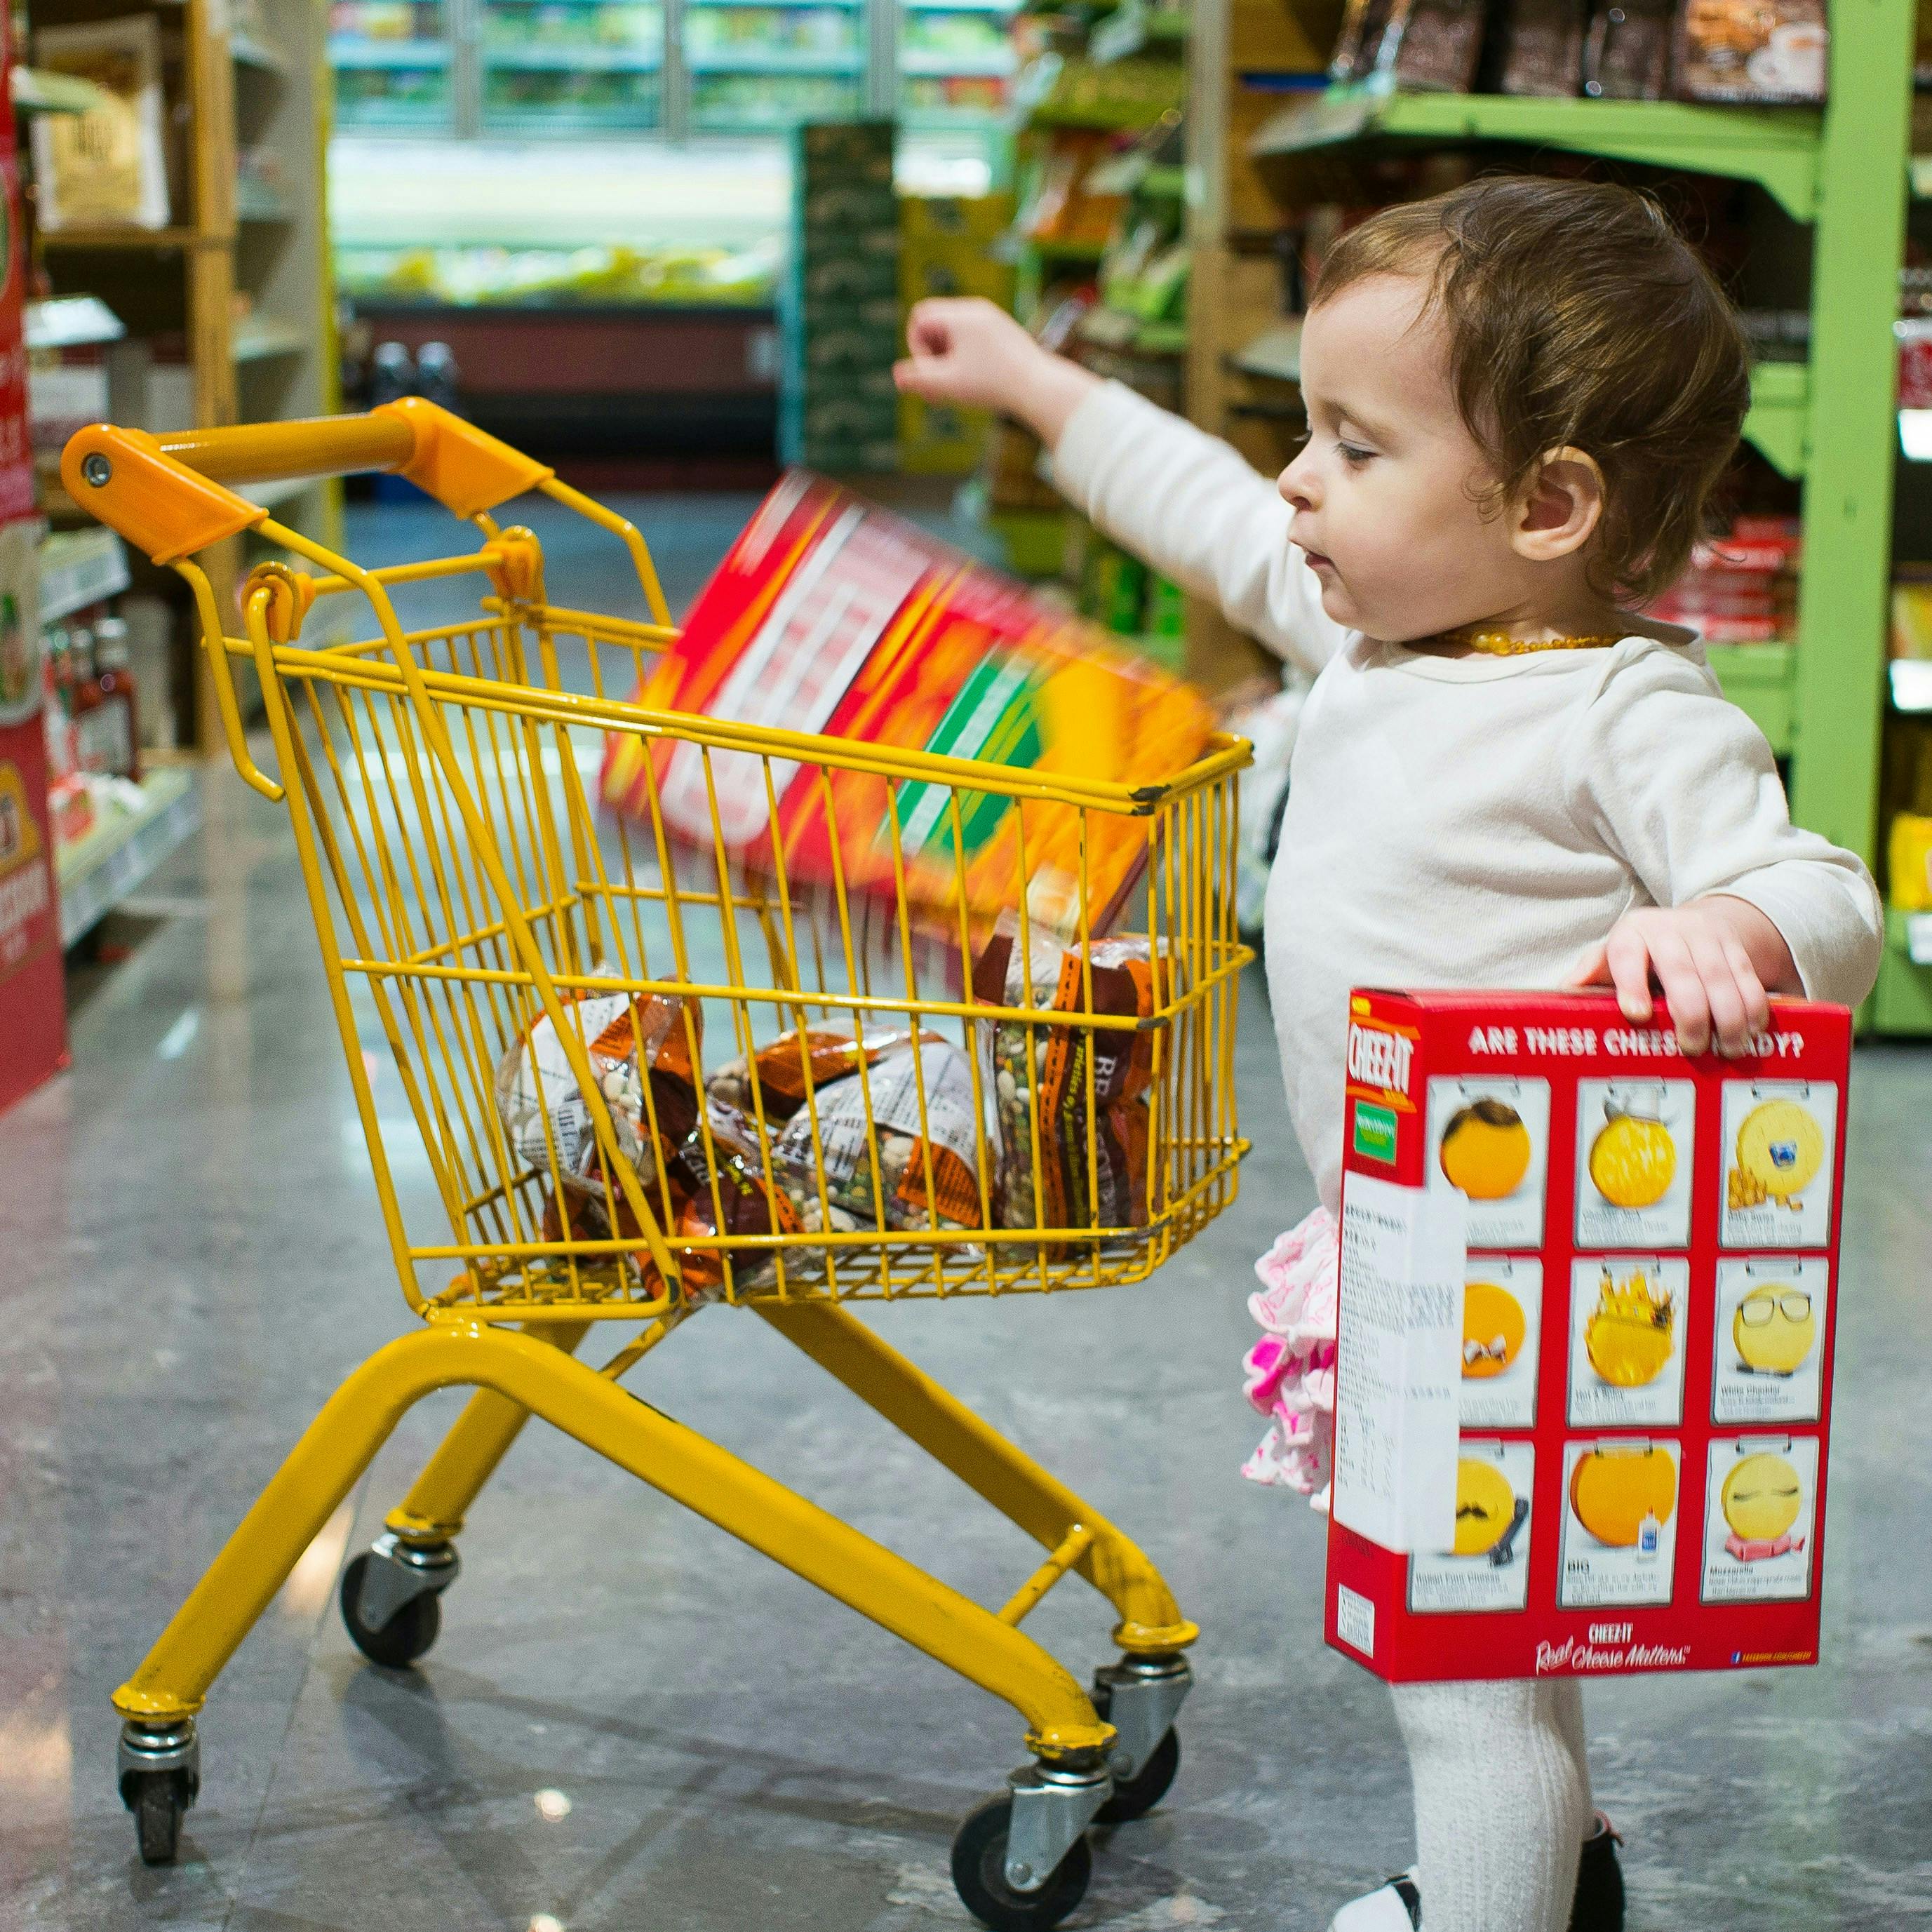 A child adding grocery items to a small yellow shopping cart.